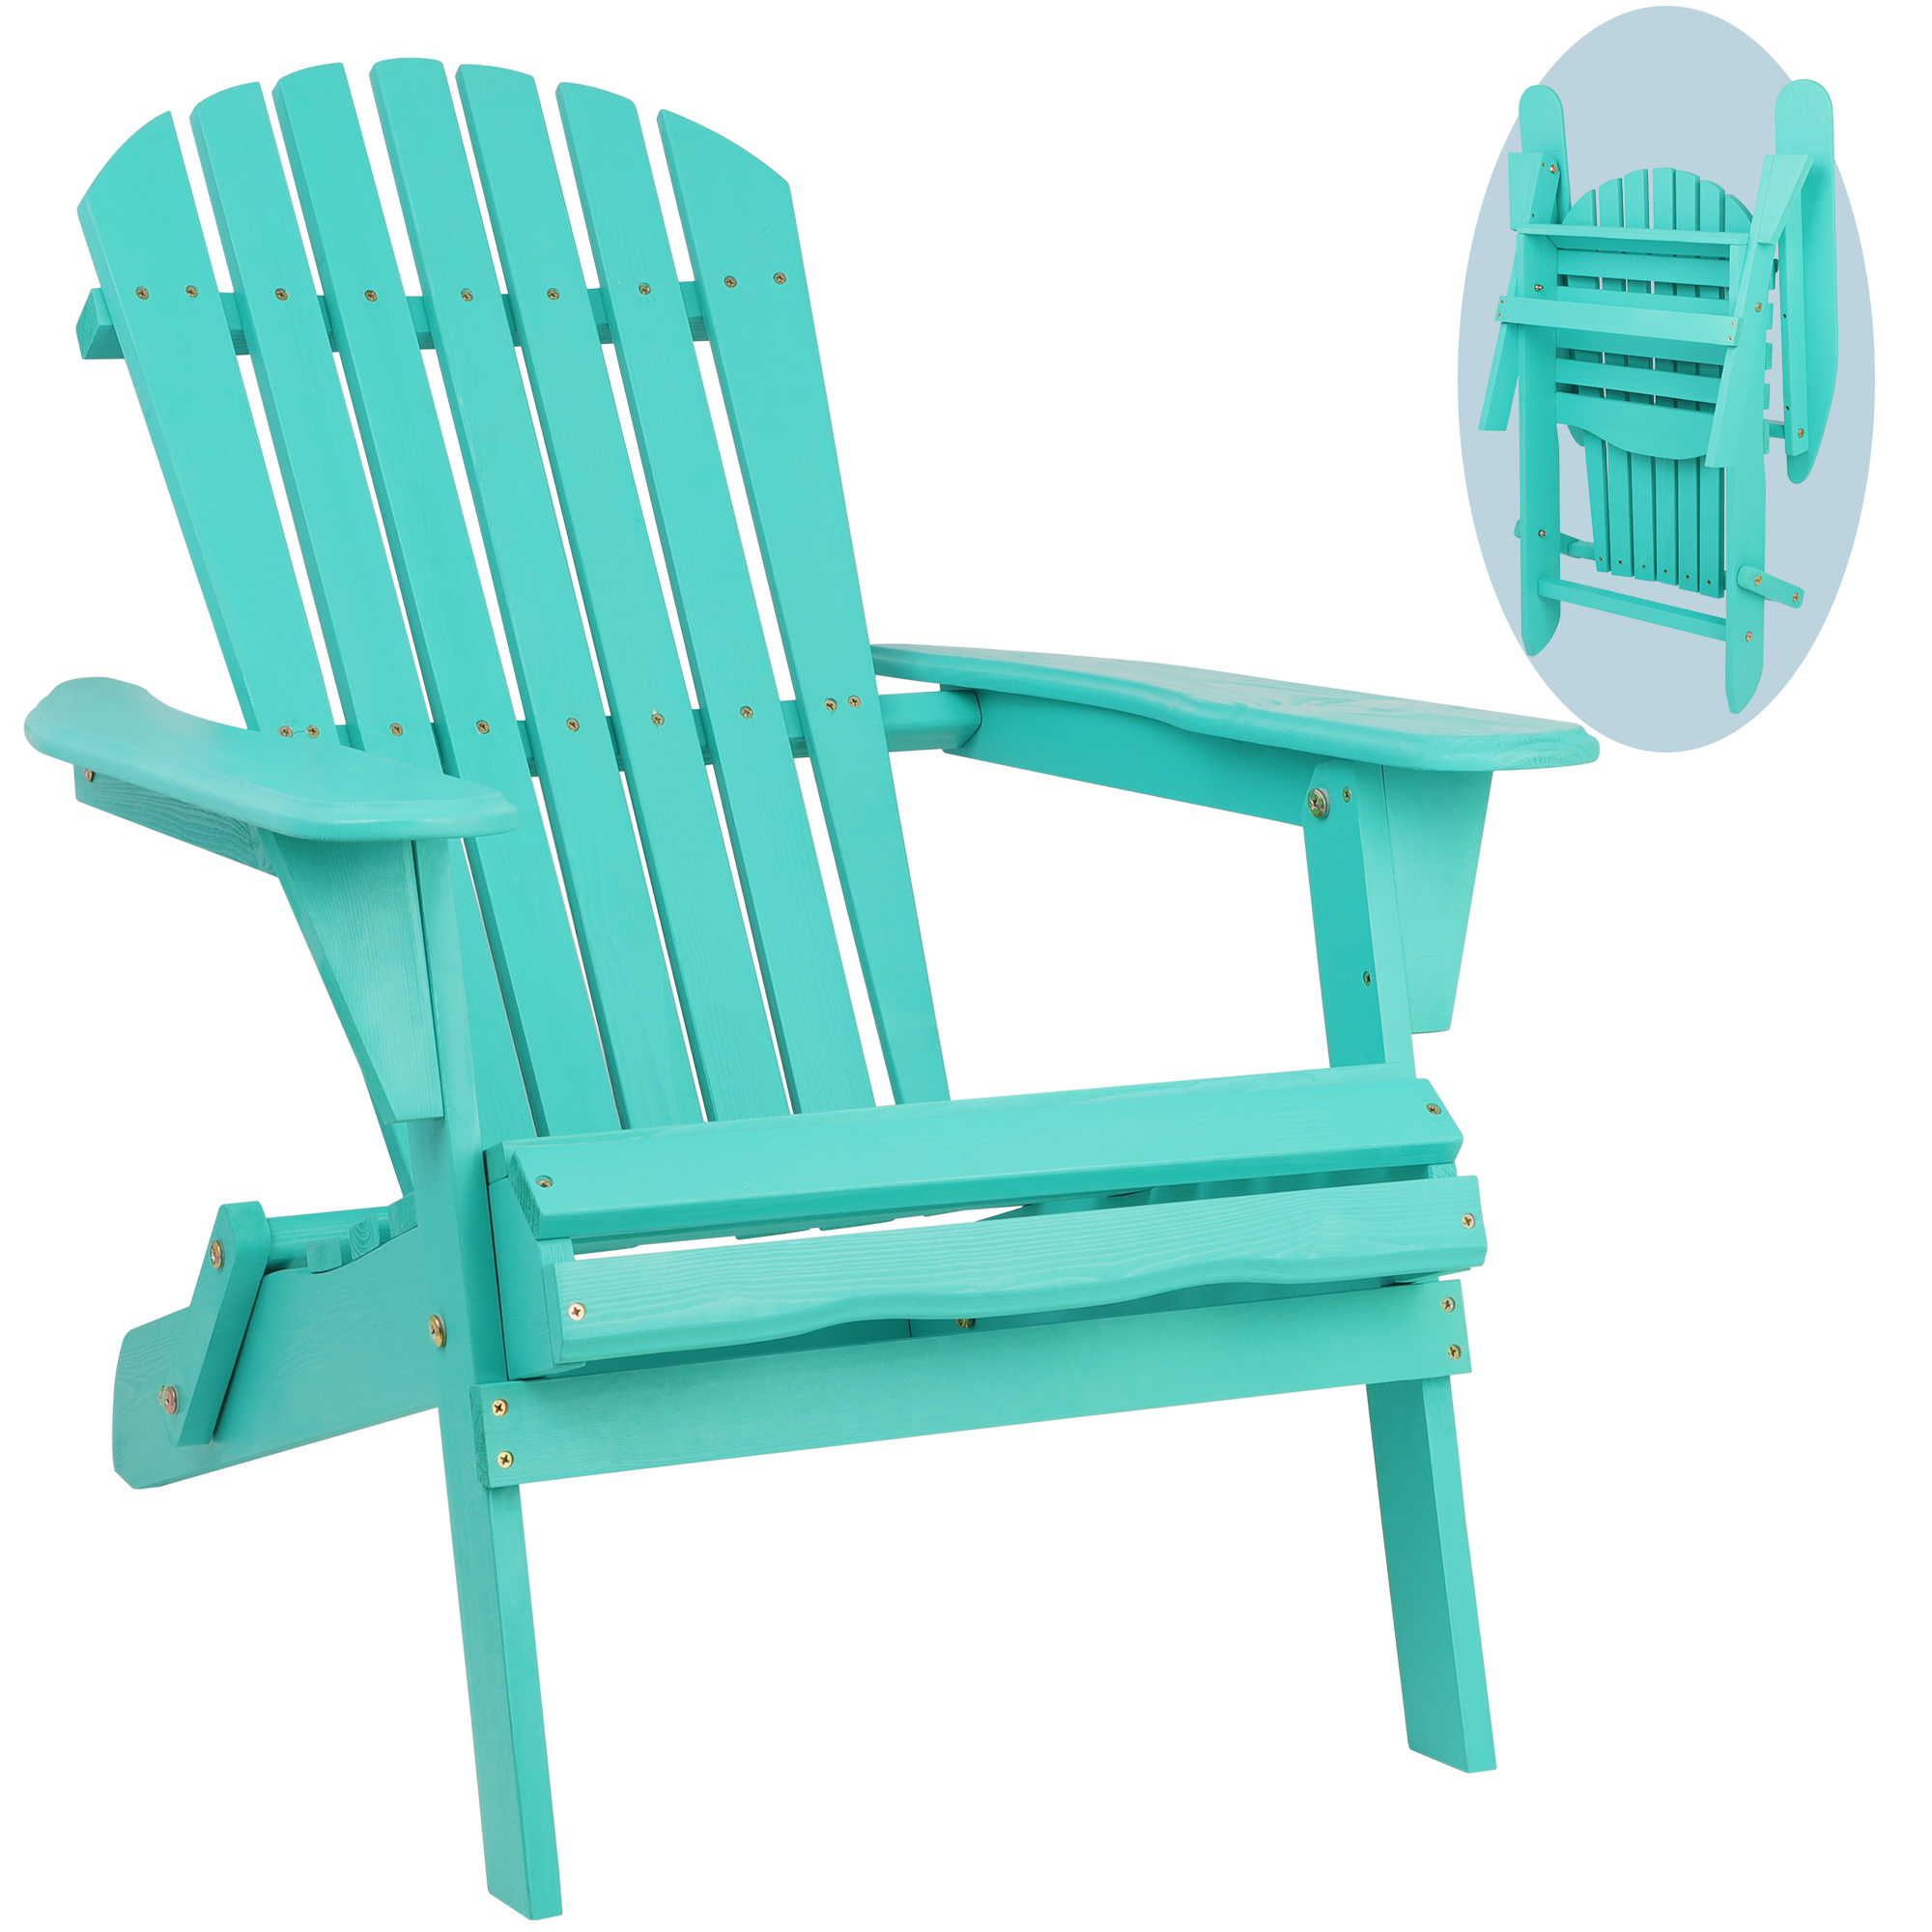 Outdoor Adirondack Chair, Seizeen Wooden Folding Adirondack Chair, Patio Furniture Lounge Chair Quick Assembled, Outdoor Chairs for Deck Pool Yard Garden, Cyan - image 1 of 8